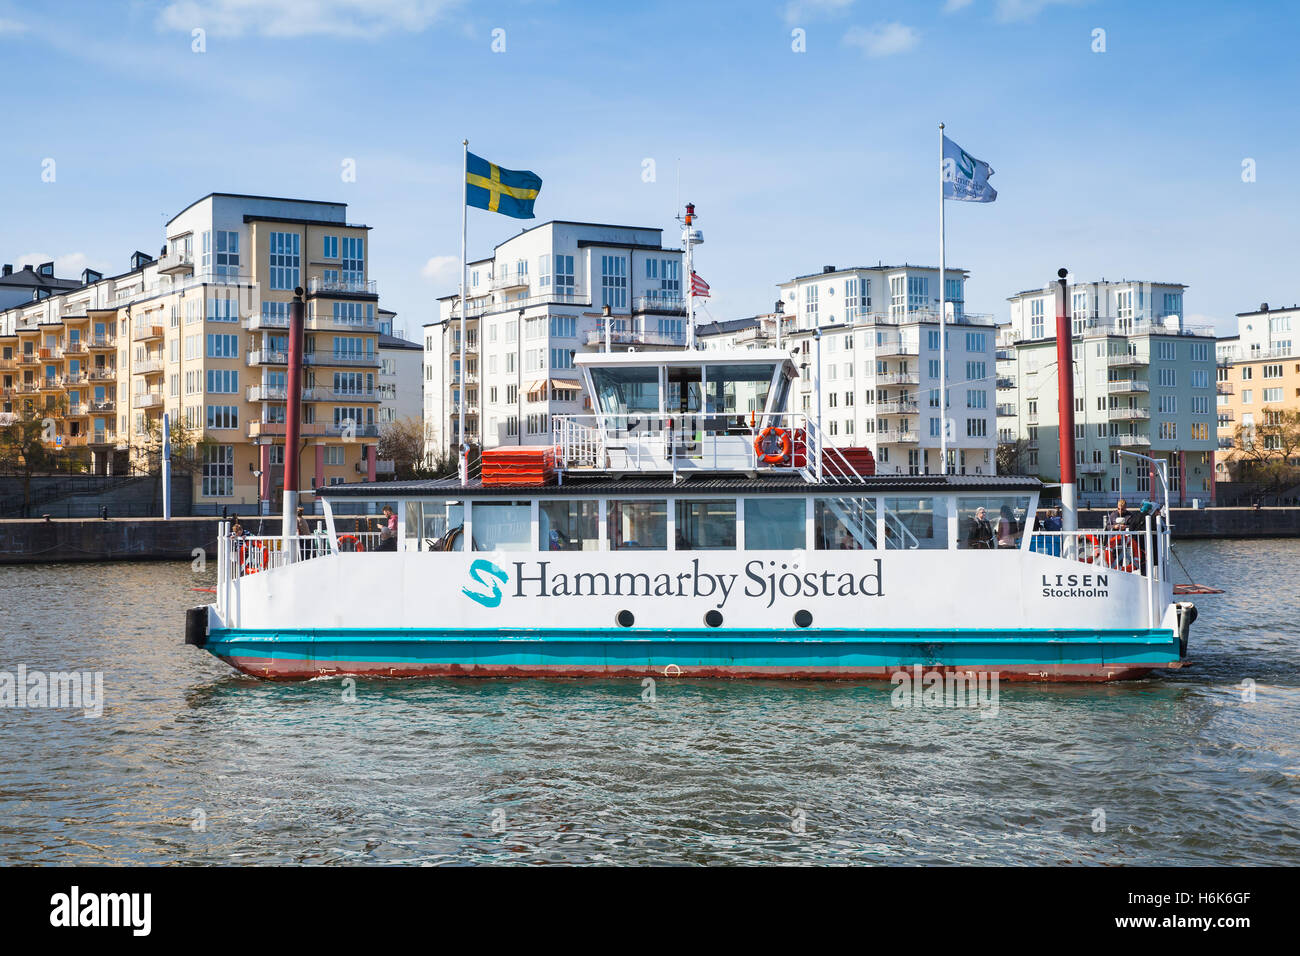 Stockholm, Sweden - May 3, 2016: Small passenger ferry with ordinary people on board, regular public transportation Stock Photo